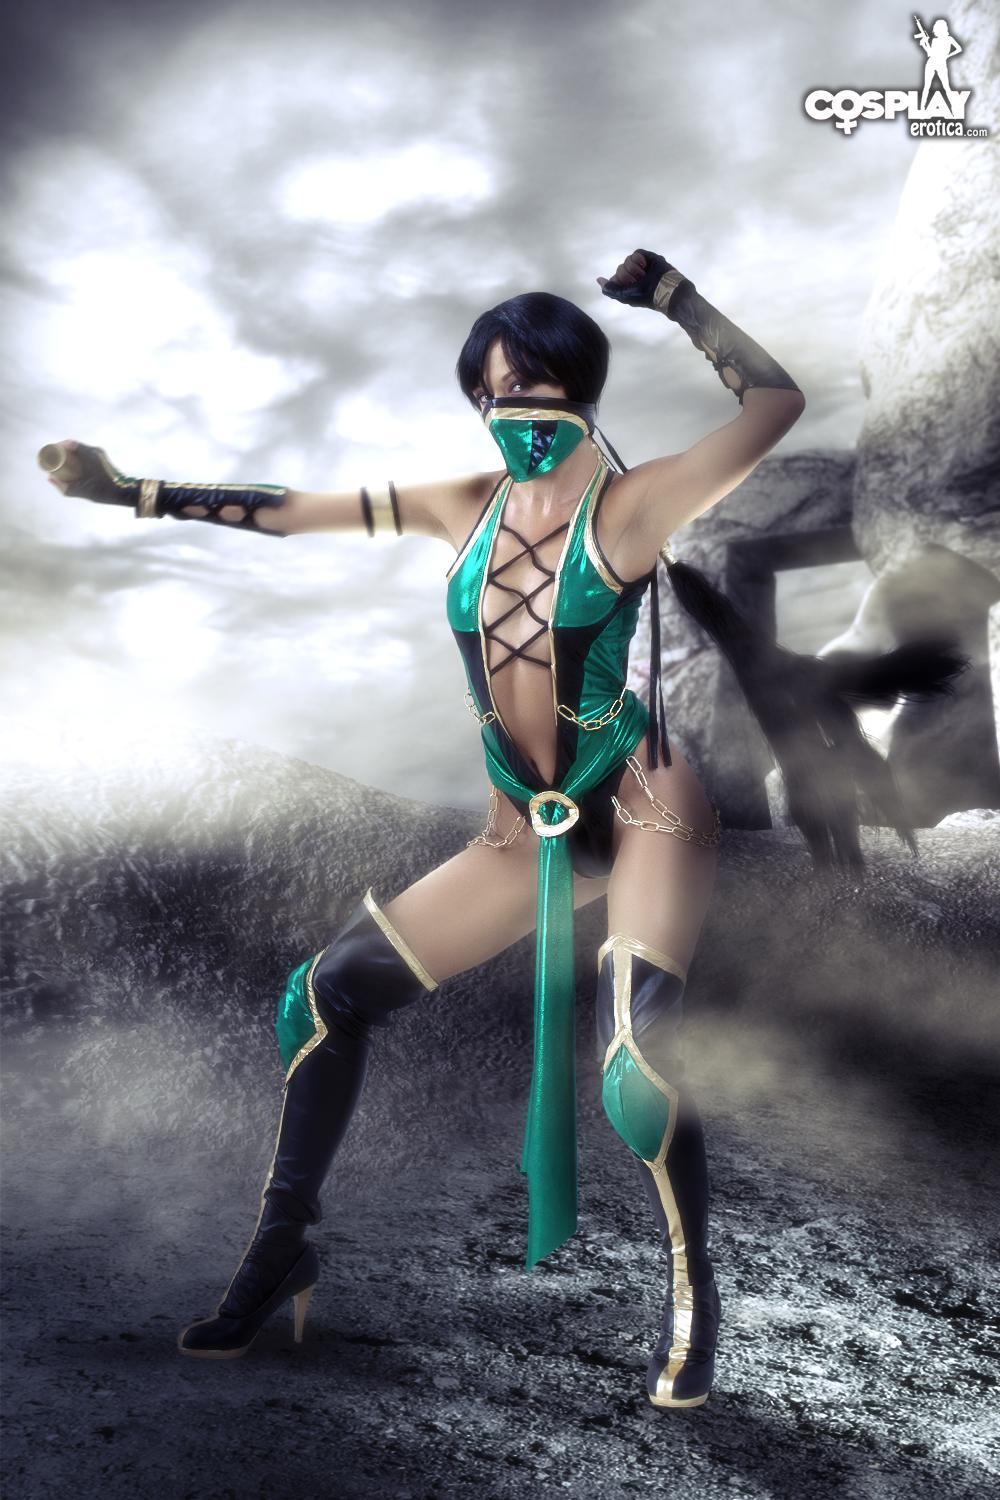 Cosplay babe Brownie dresses as a super hot Jade from Mortal Kombat #53563373